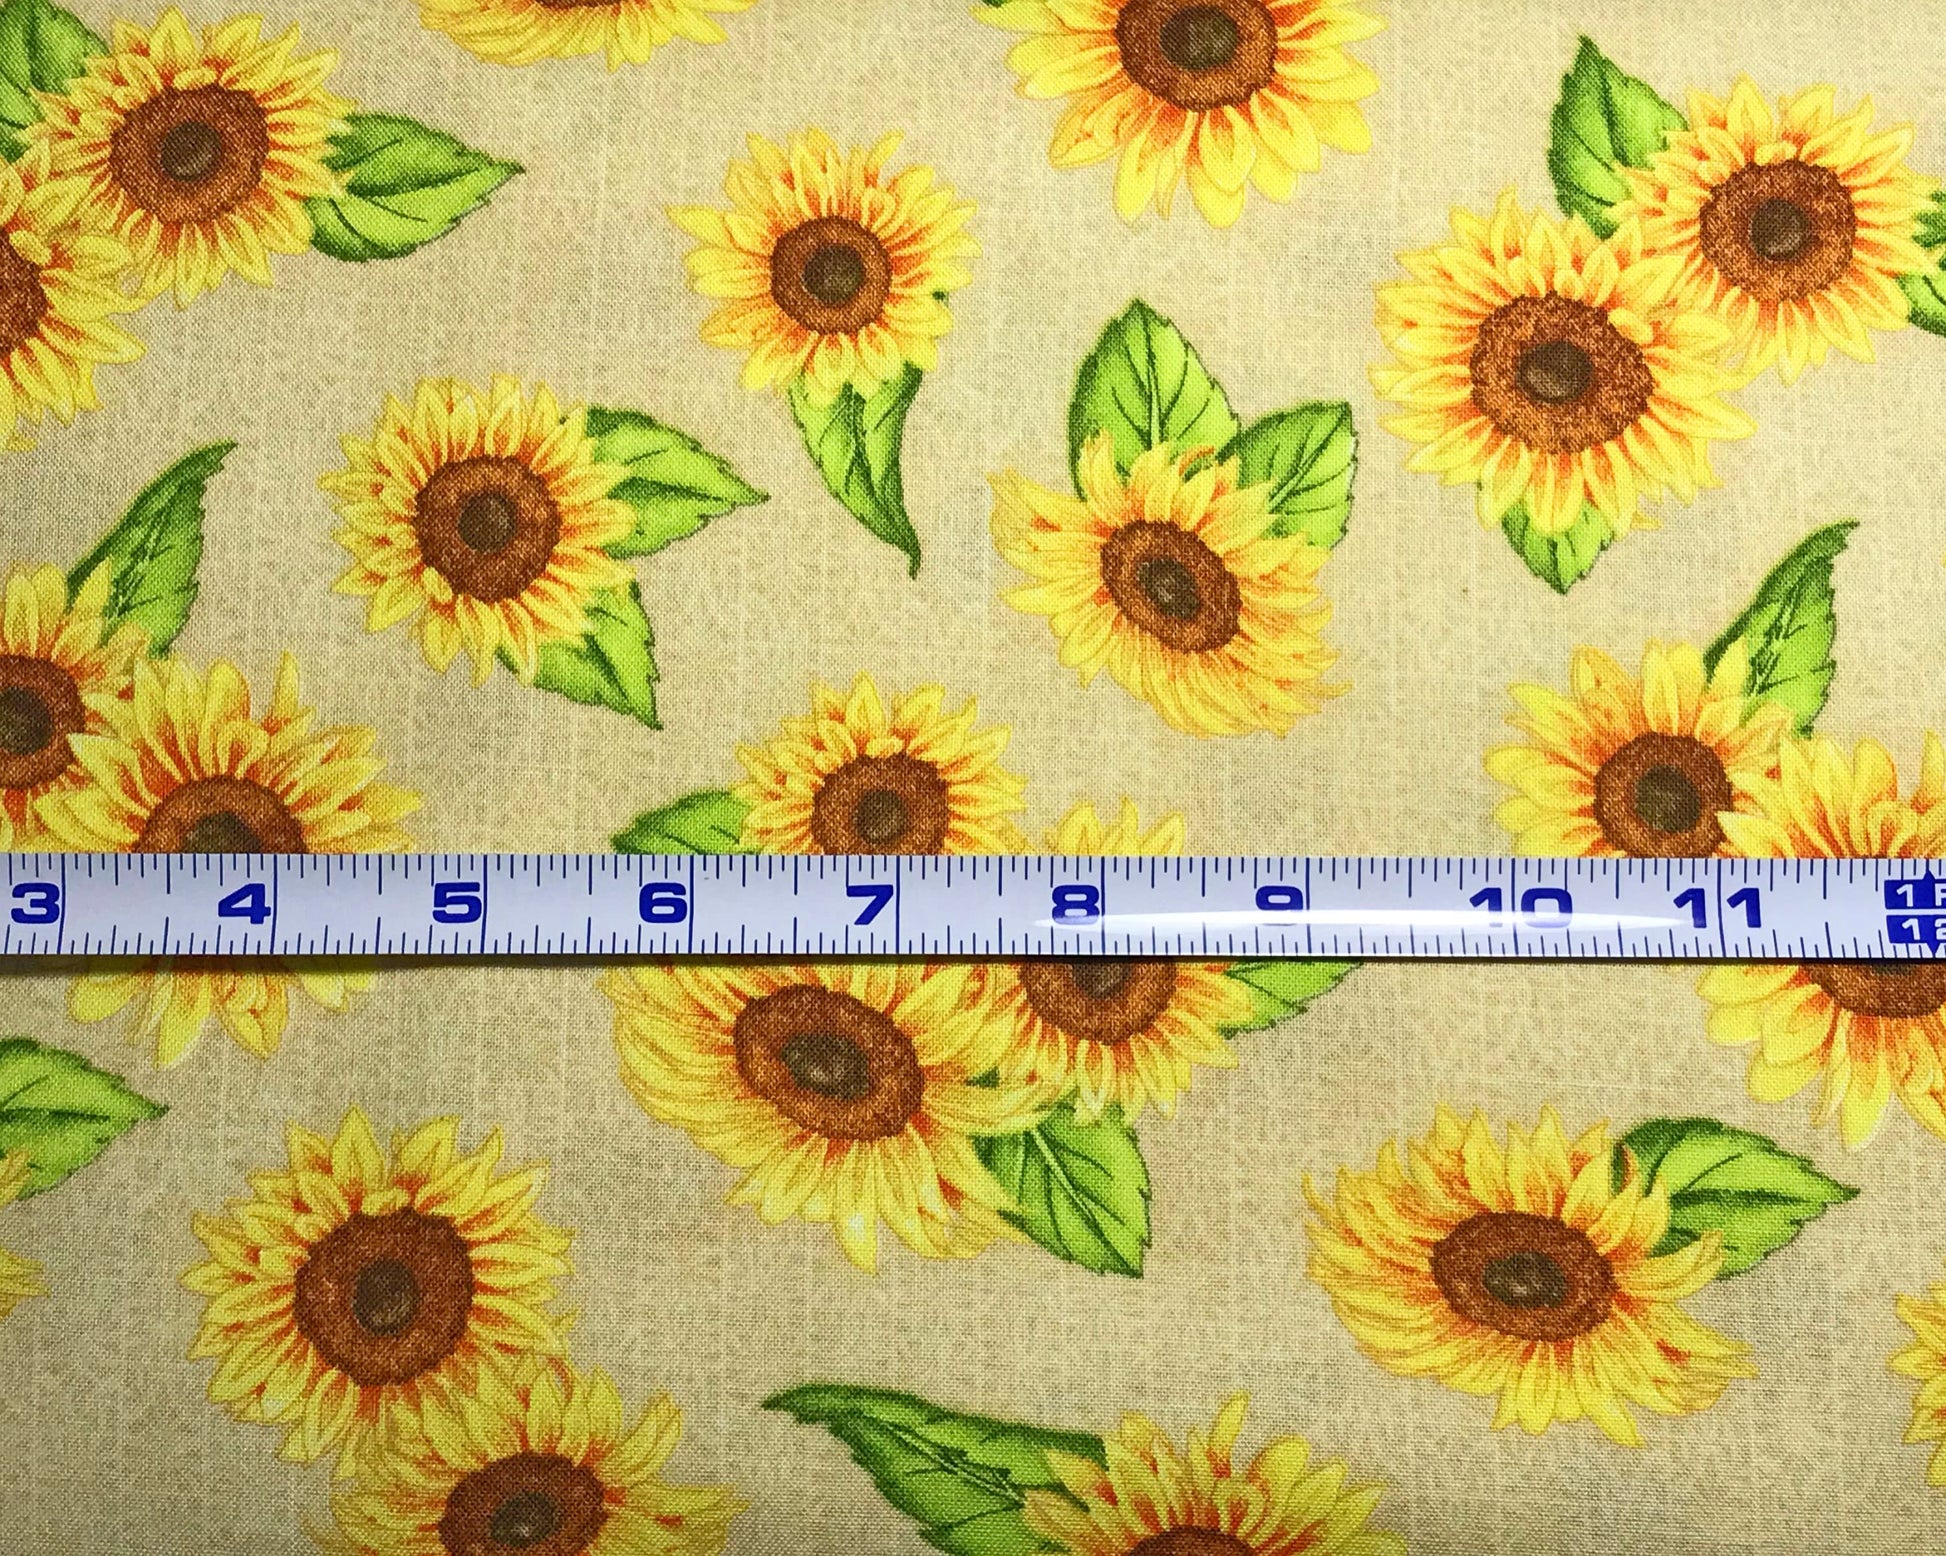 Jardin Du Soleil Tan Sunflower Toss Fabric - Wilmington Prints 32062-257, Yellow and Tan Sunflower Fabric - By the Yard